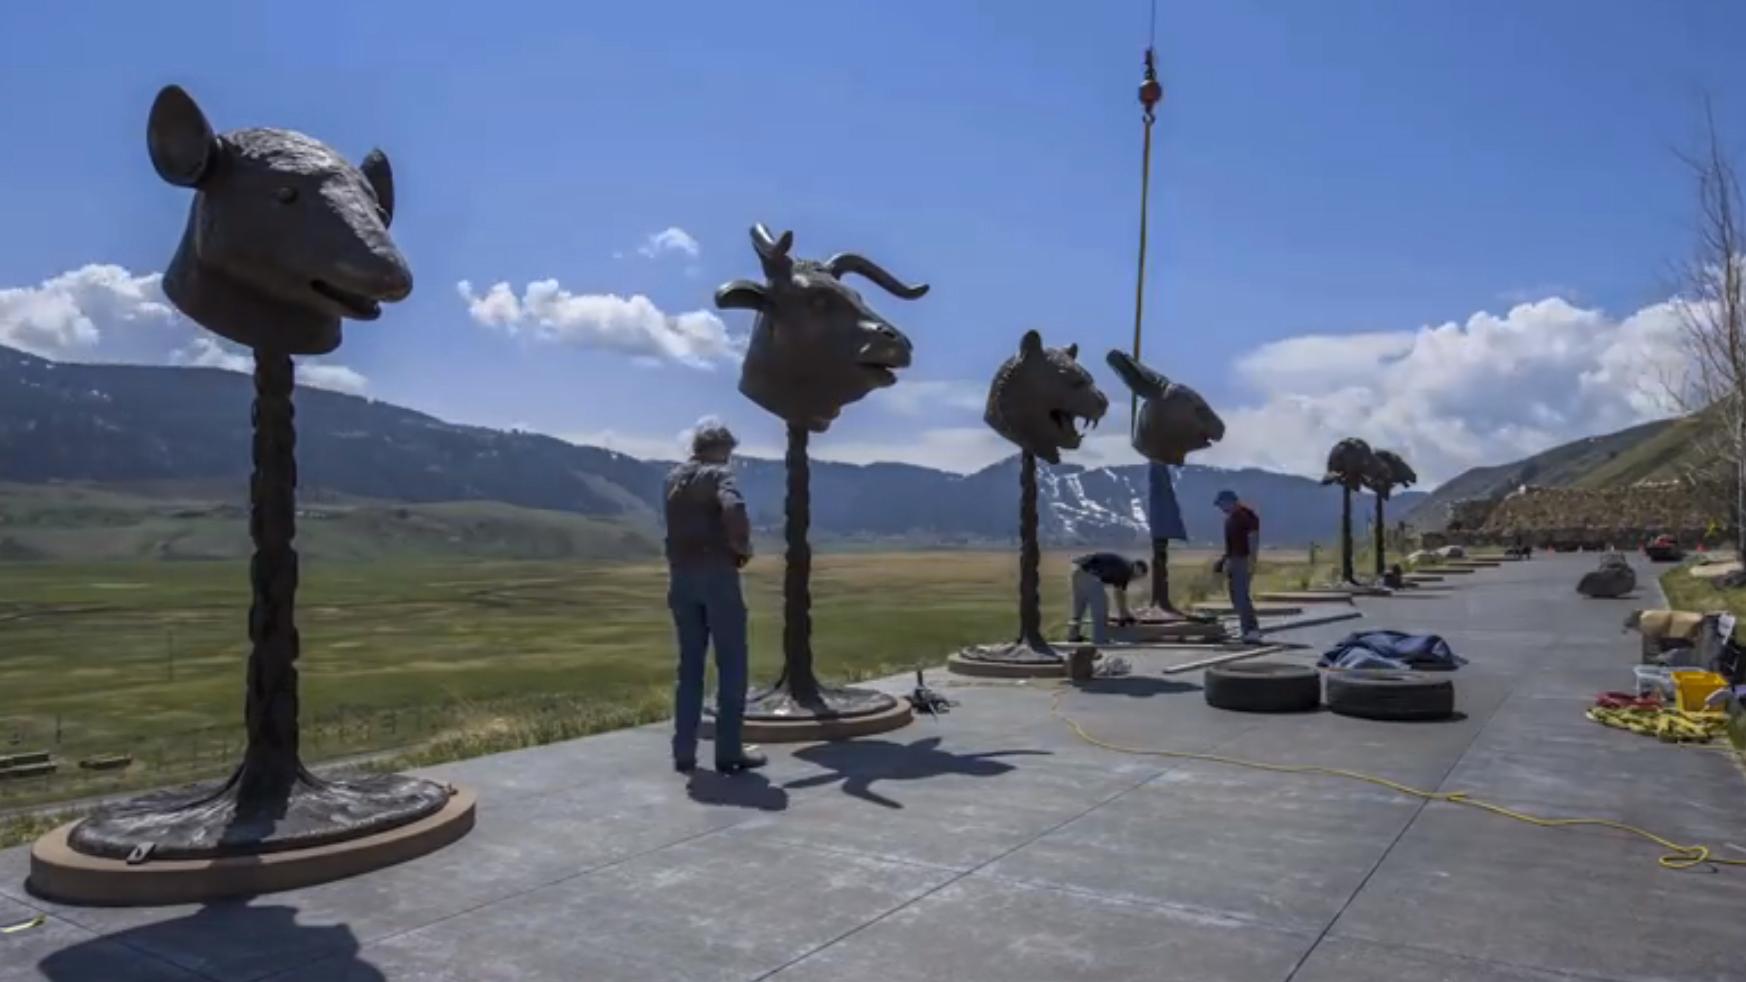 Ai Weiwei’s project, titled “Circle of Animals/Zodiac Heads" being installed in Jackson, Wyoming.